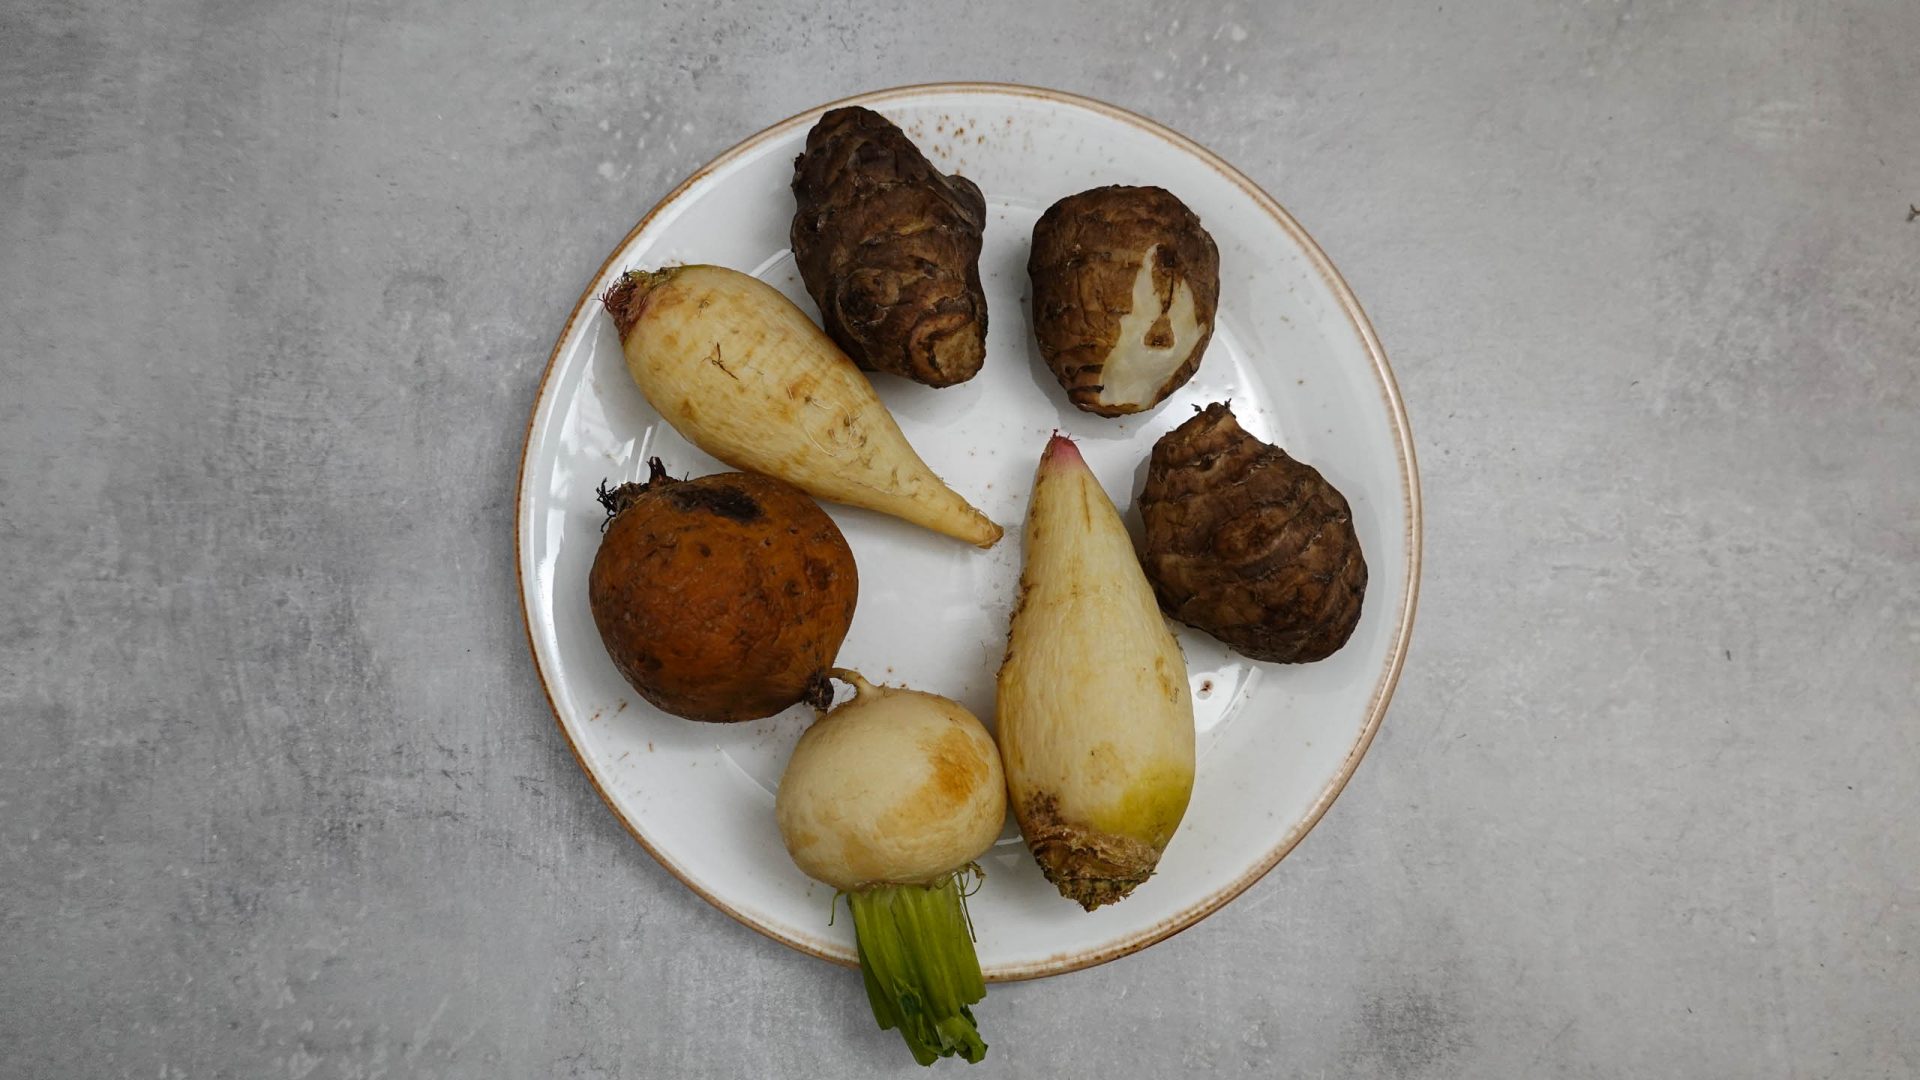 Vegetable Food Lab - Our selection of root vegetables  